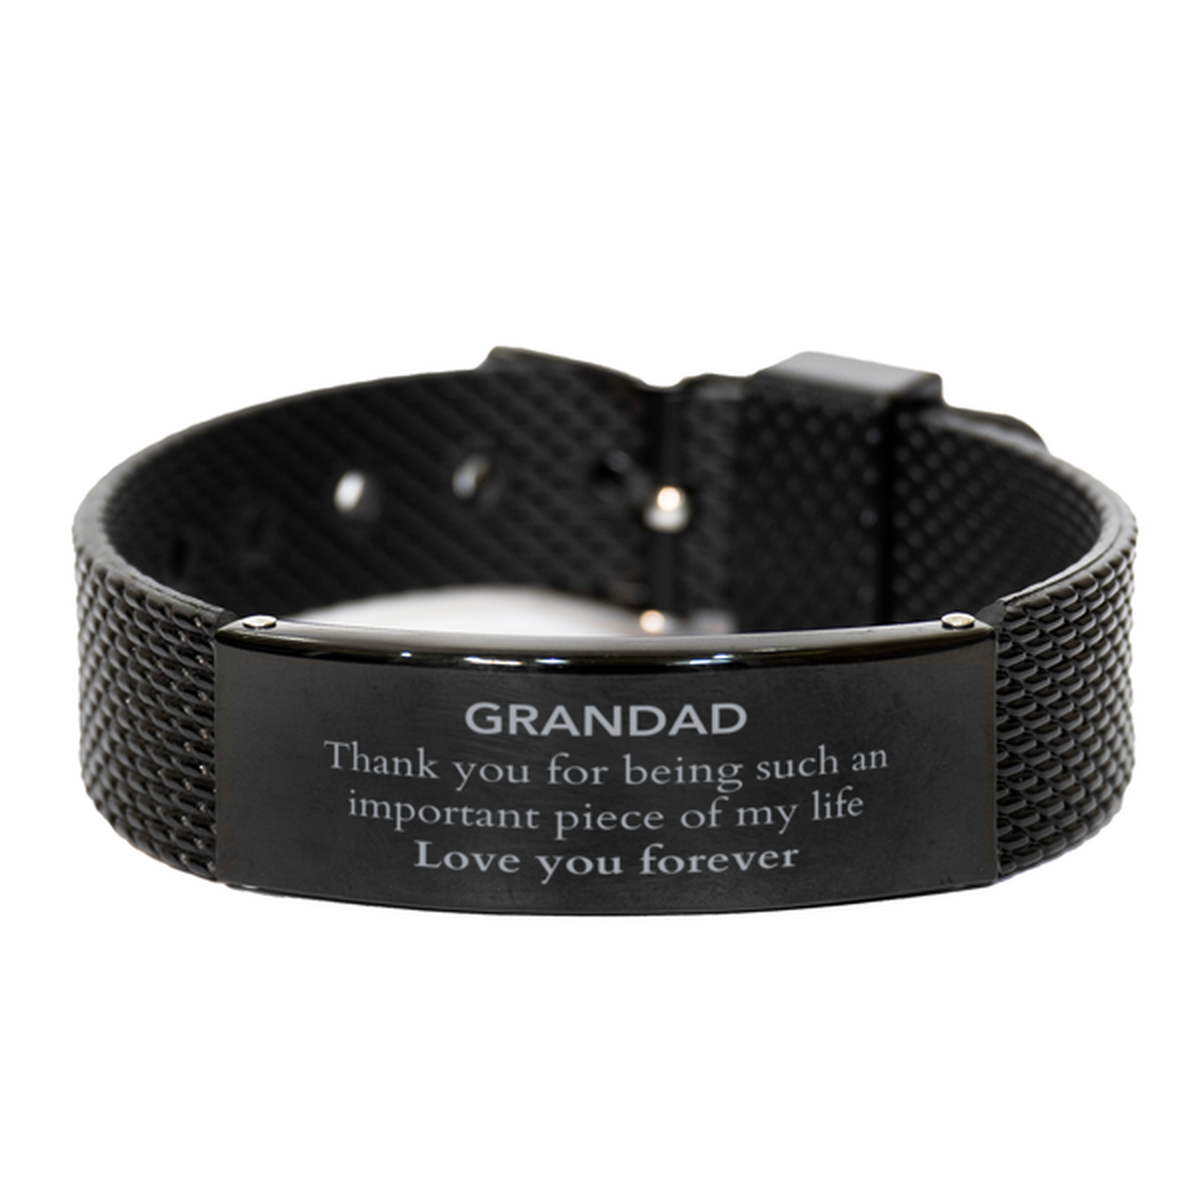 Appropriate Grandad Black Shark Mesh Bracelet Epic Birthday Gifts for Grandad Thank you for being such an important piece of my life Grandad Christmas Mothers Fathers Day